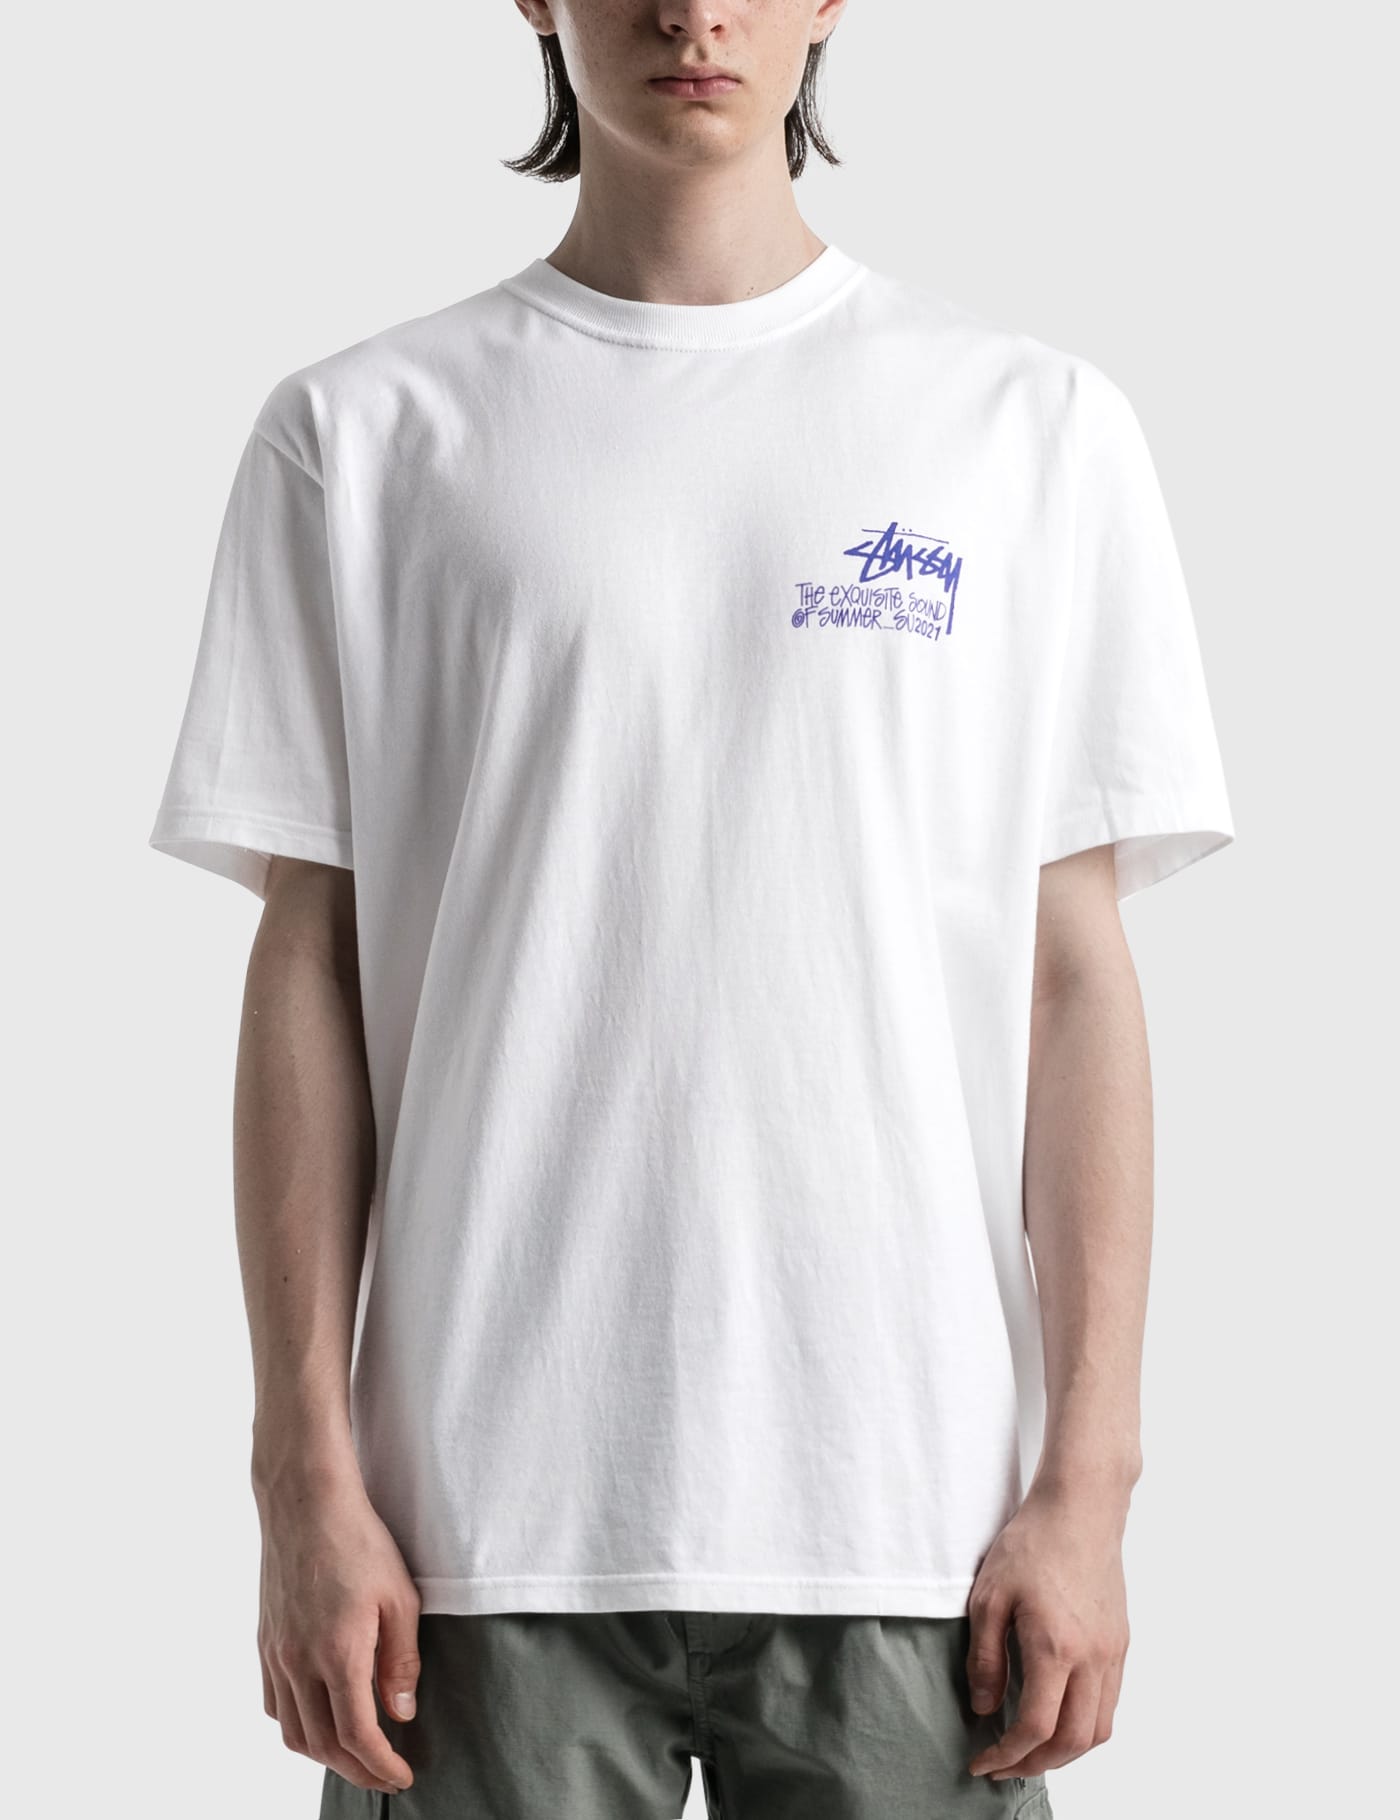 Stüssy - Sound Of Summer T-shirt | HBX - Globally Curated Fashion 